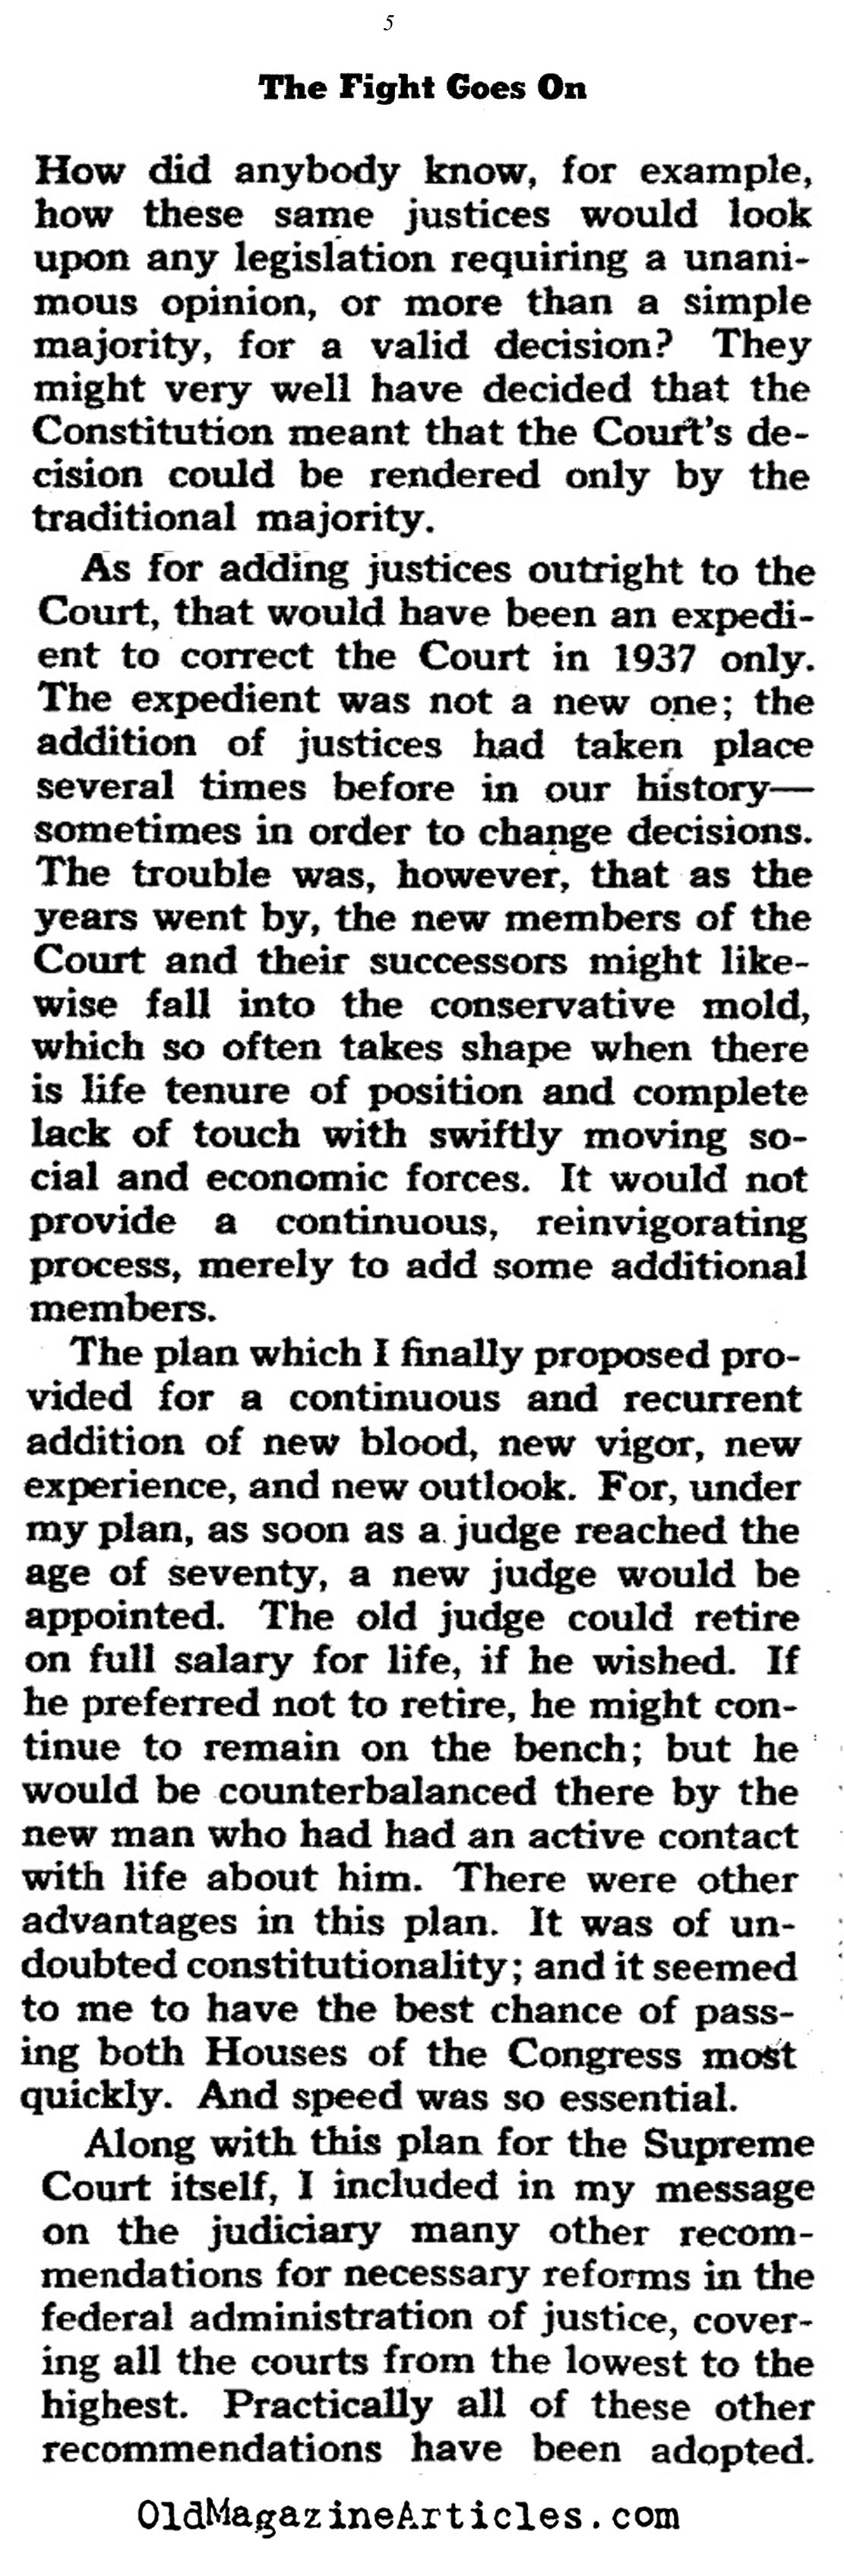 FDR on His Efforts to Pack the Court (Collier's Magazine, 1941)